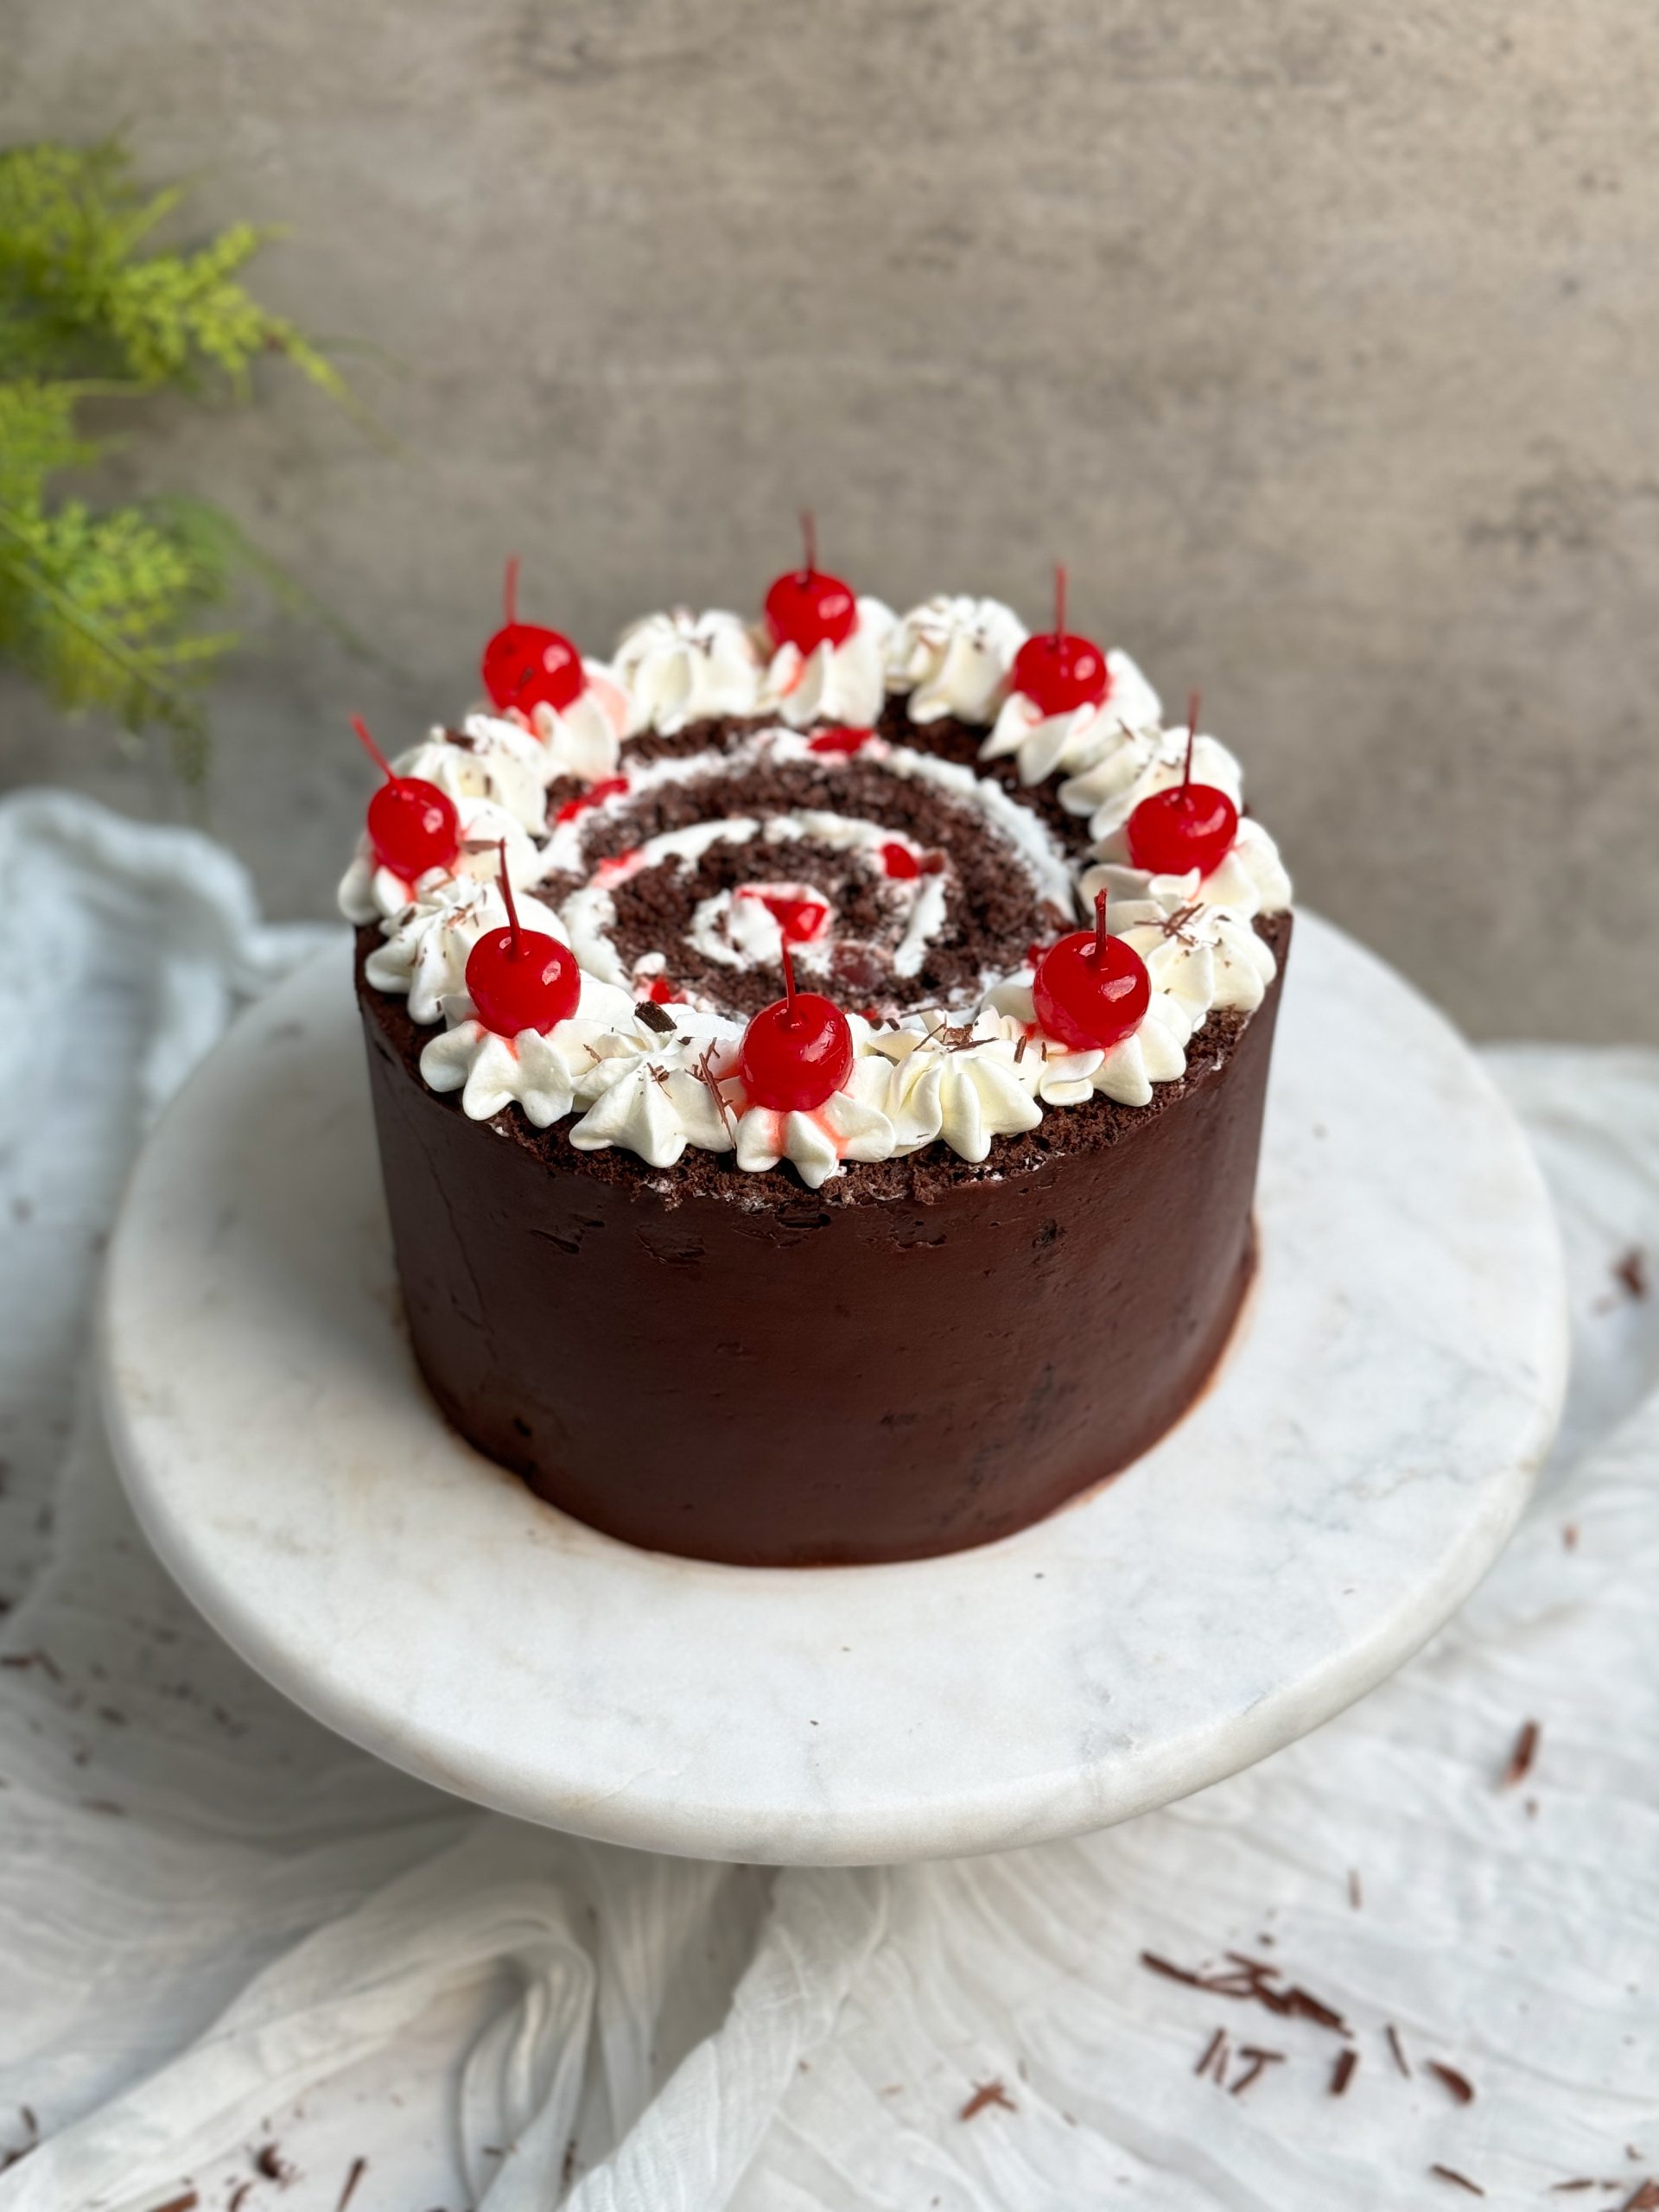 vertical black forest swiss roll cake on a marble serving stand. cake is coated in ganache with a swirl on top. decorated with whipped cream and cherries